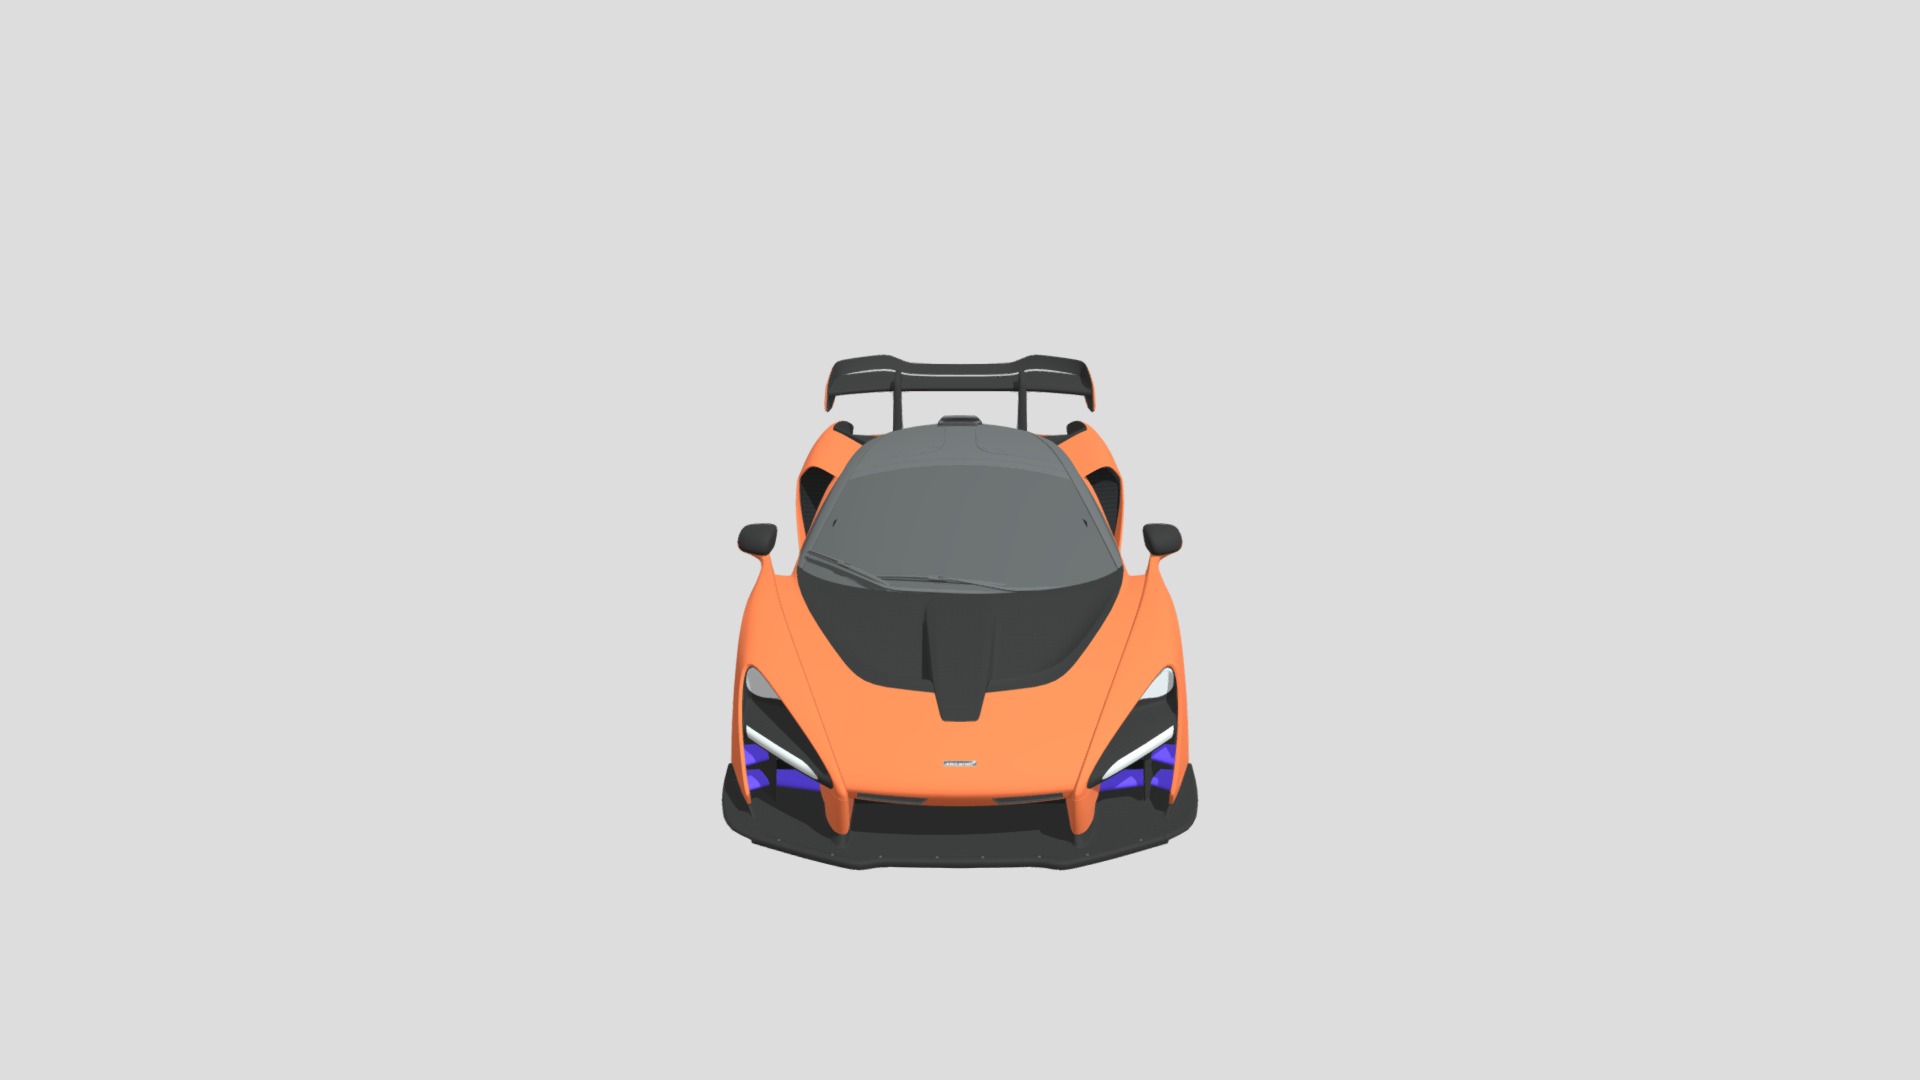 3D model LowPoly McLaren Senna 2019 - This is a 3D model of the LowPoly McLaren Senna 2019. The 3D model is about a car with a spoiler.